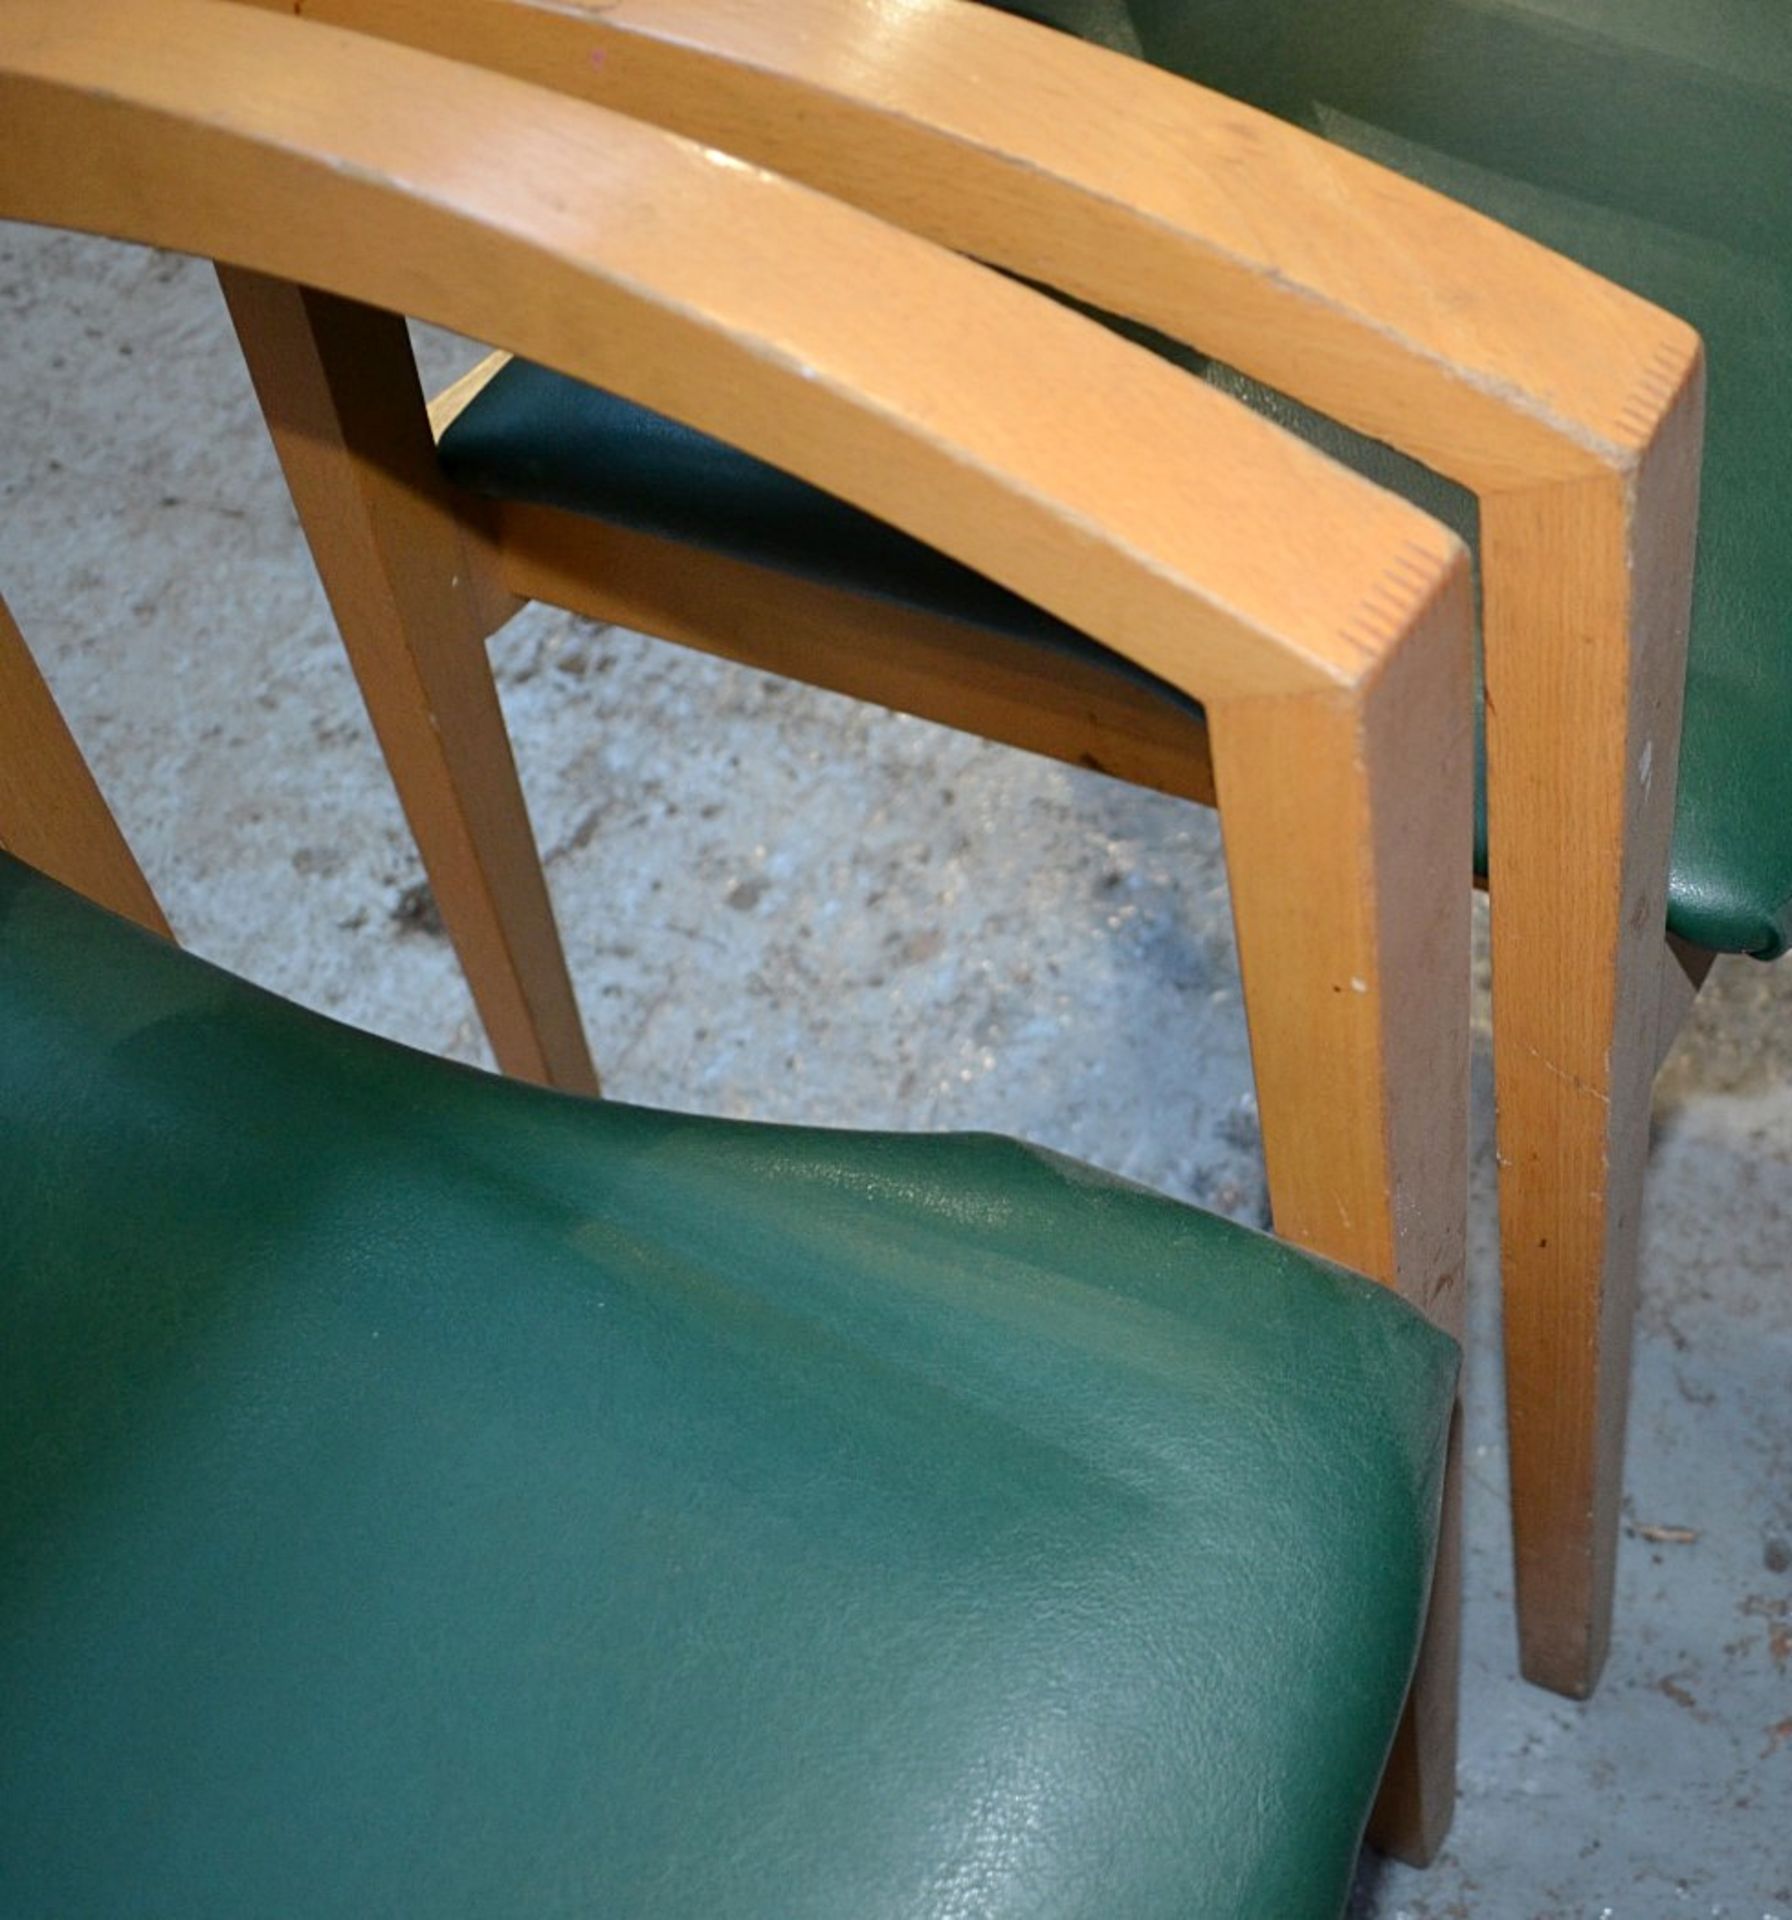 3 x Matching Wooden Chairs Upholstered Green Faux Leather - Dimensions: W57.5 x D50 x H86 x SH46cm - - Image 7 of 8